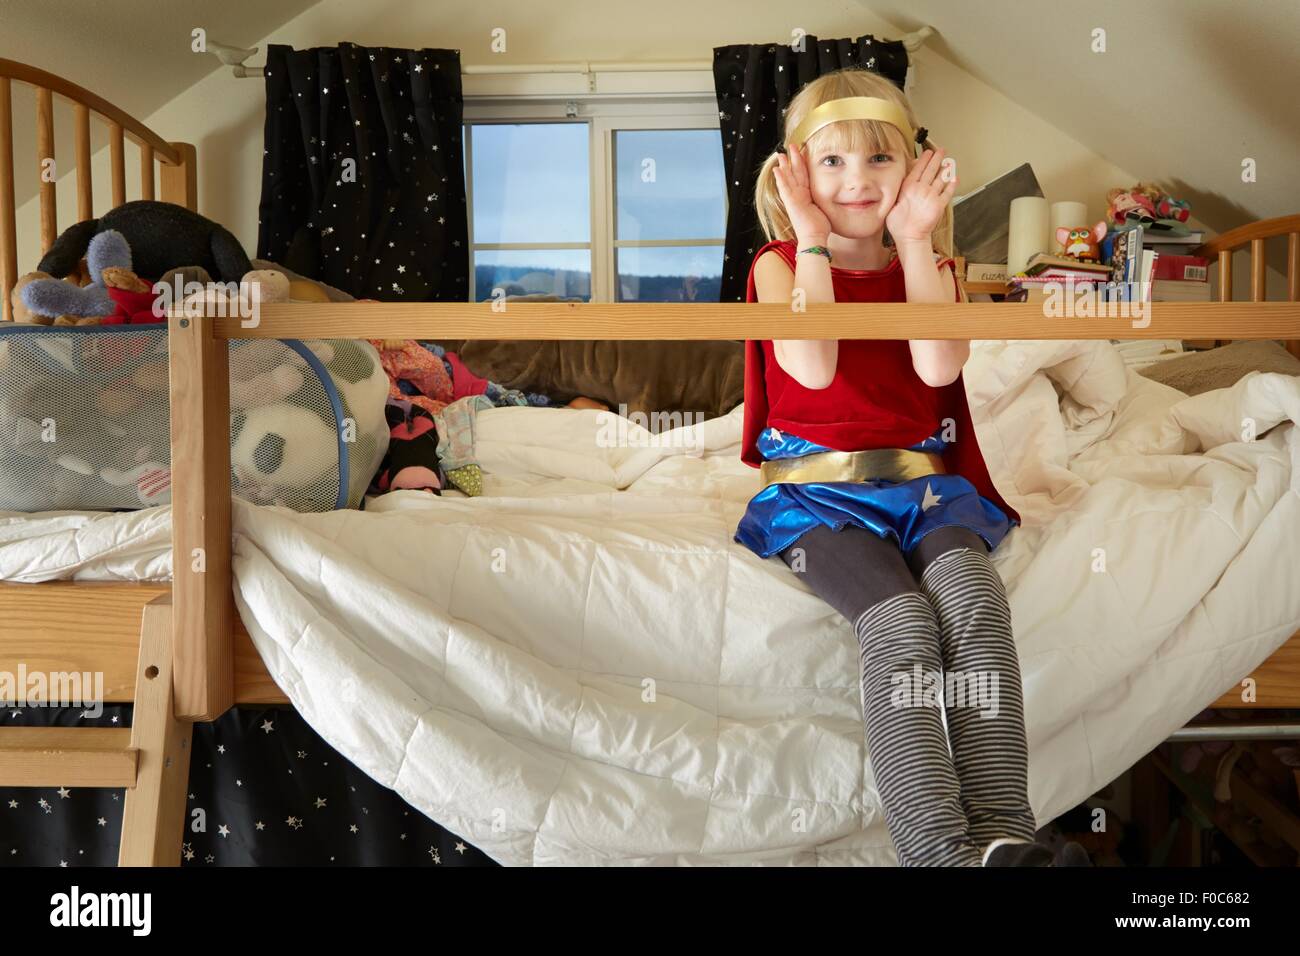 Portrait of young girl, sitting on bed, wearing fancy dress costume Stock Photo